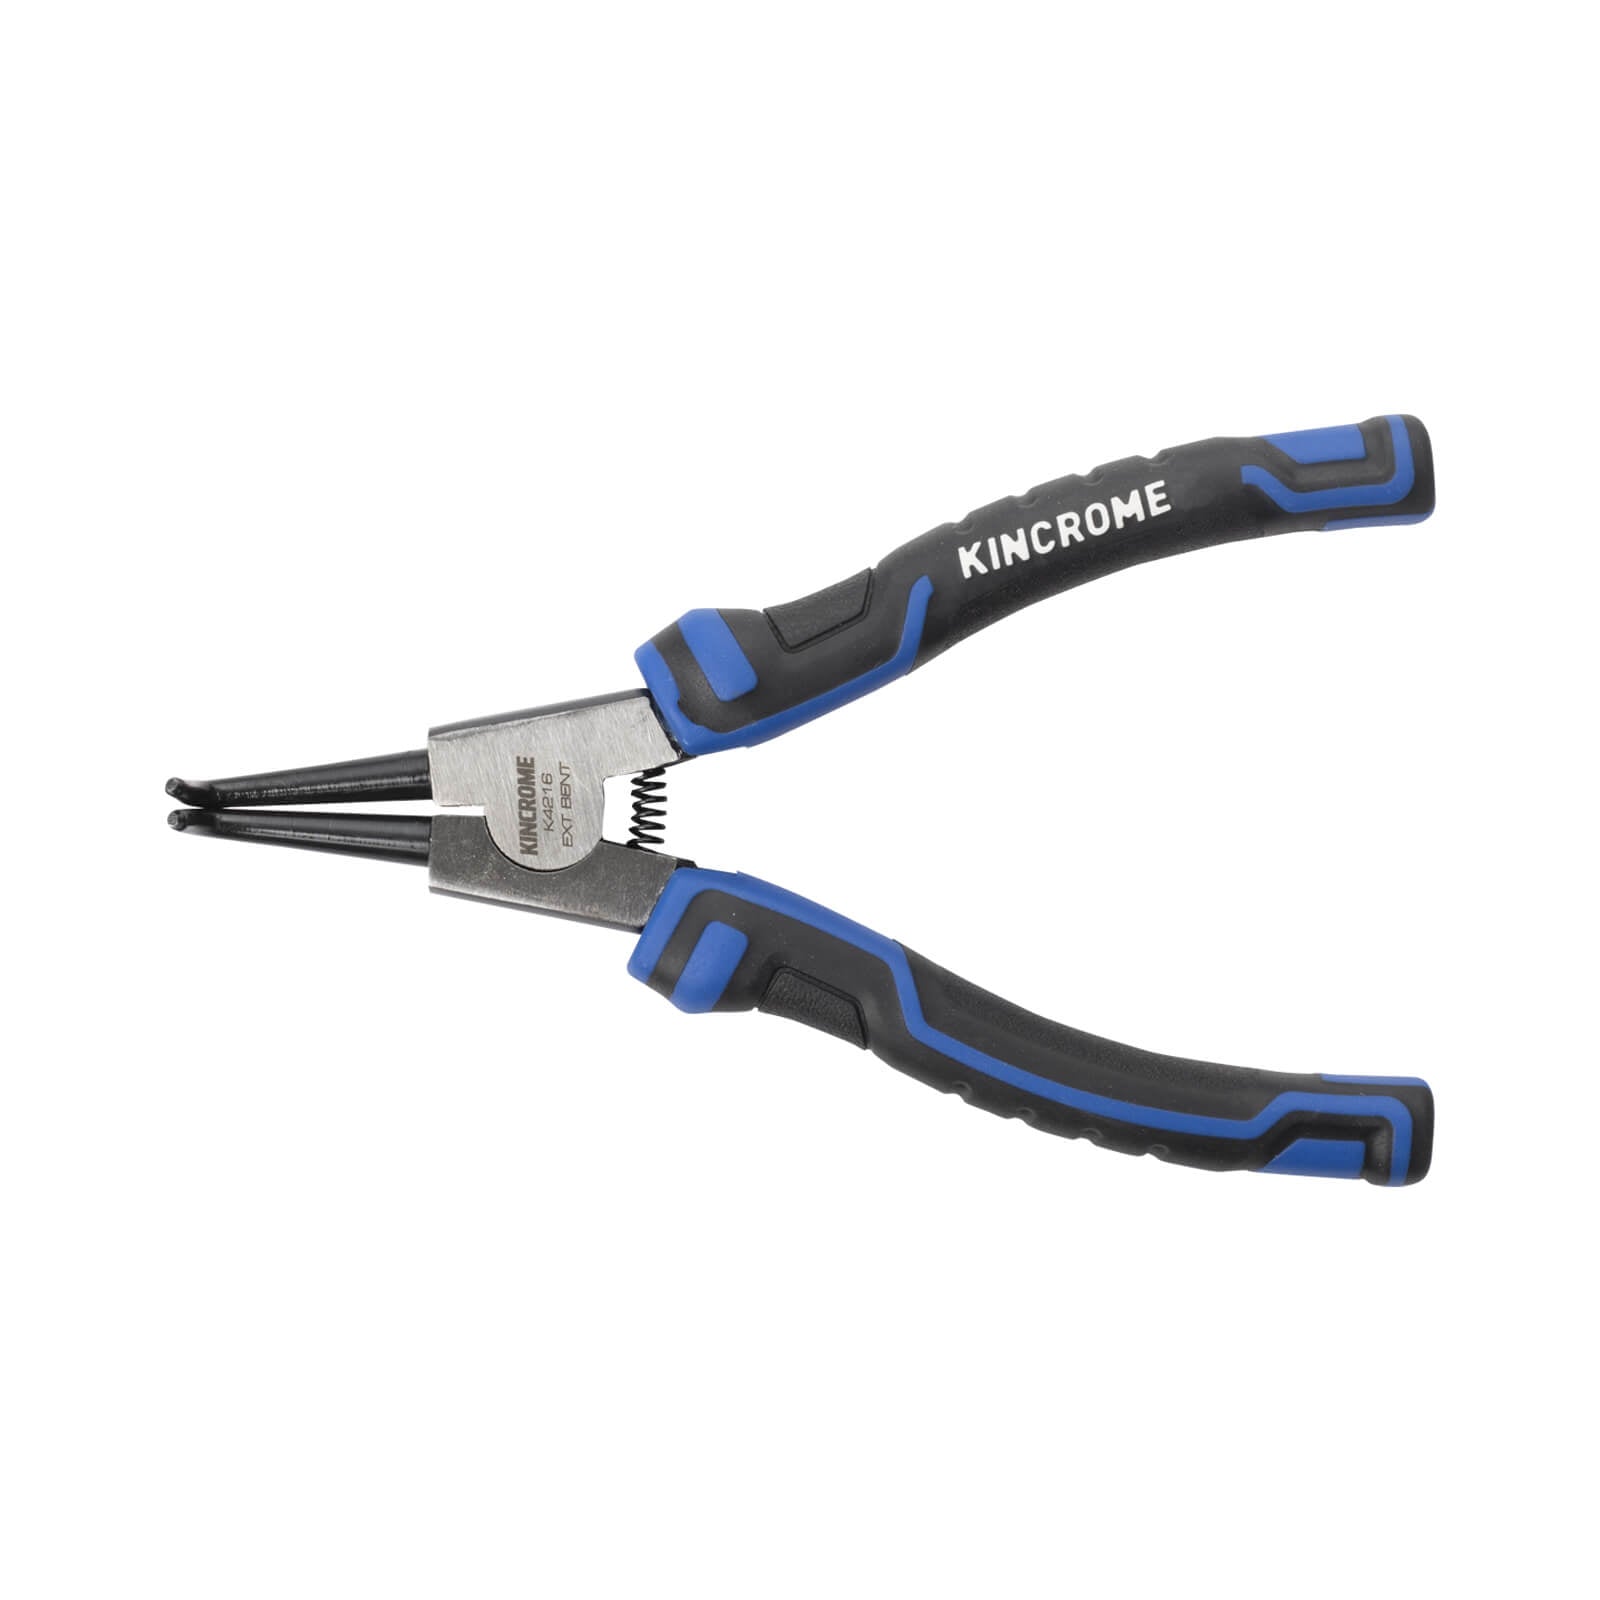 Circlip Pliers, Soft Grip, 175mm by Kincrome